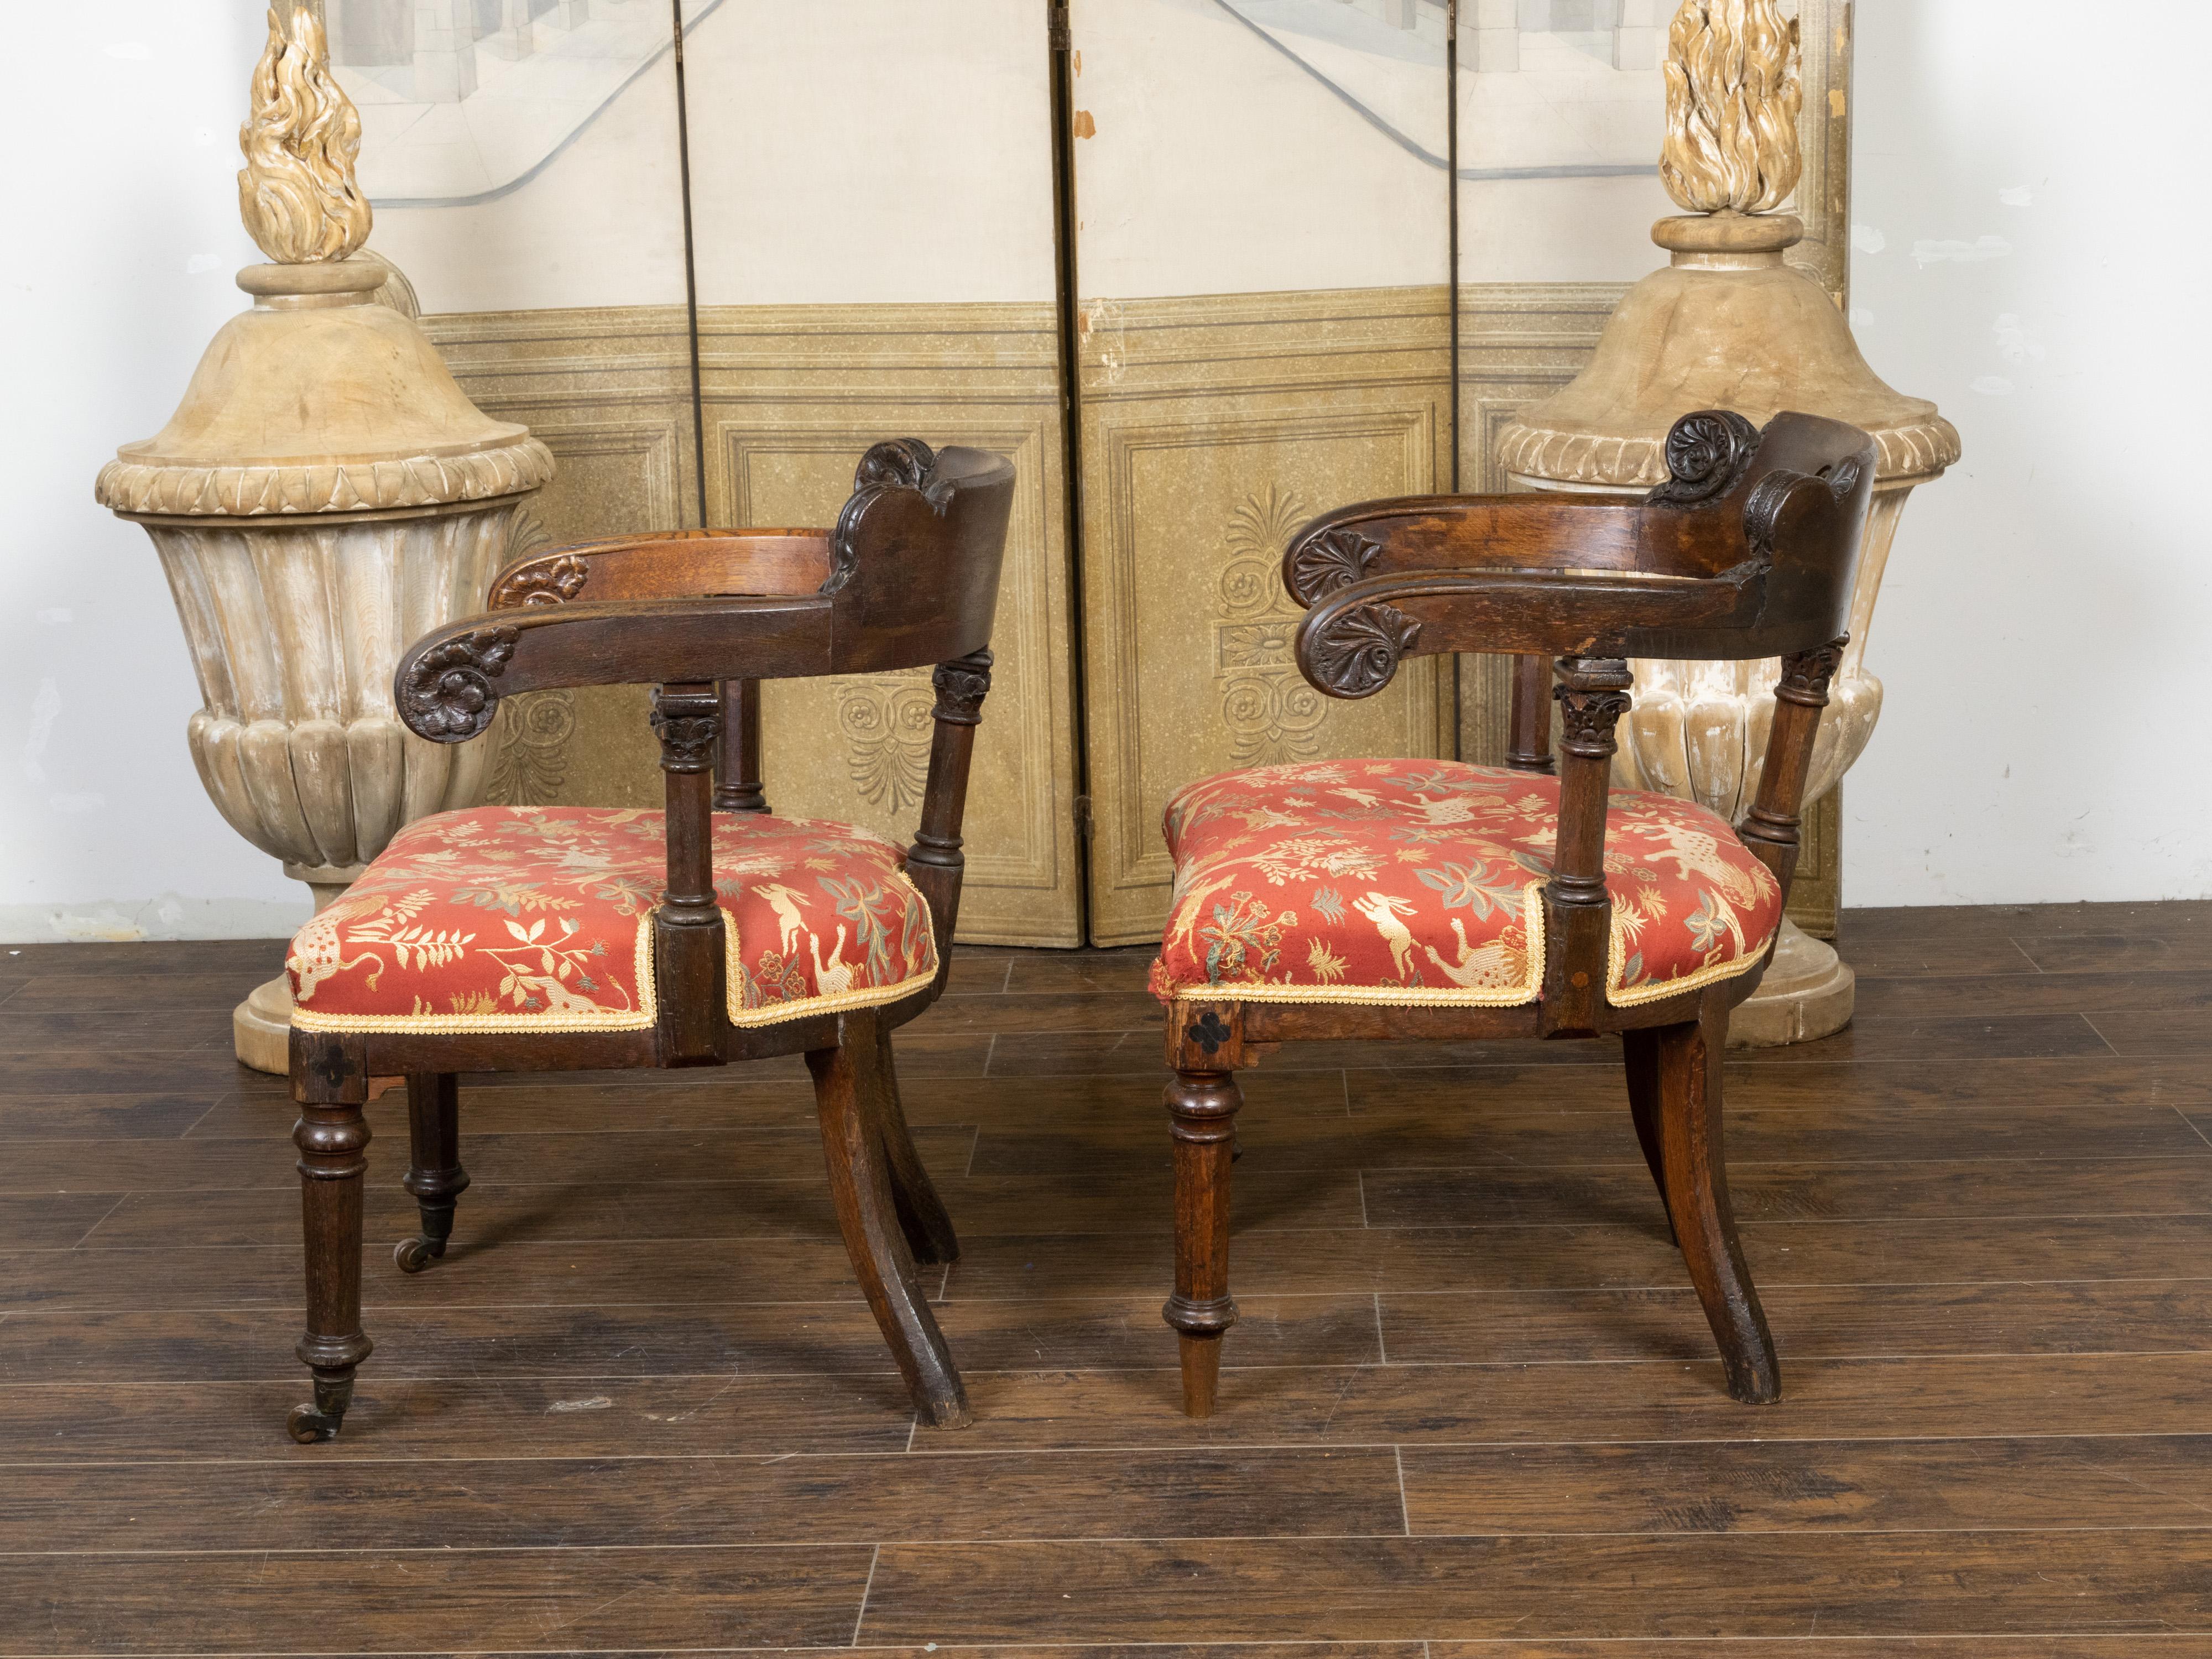 19th Century Pair of English Regency Style Carved Oak Klismos Chairs with Horseshoe Backs For Sale